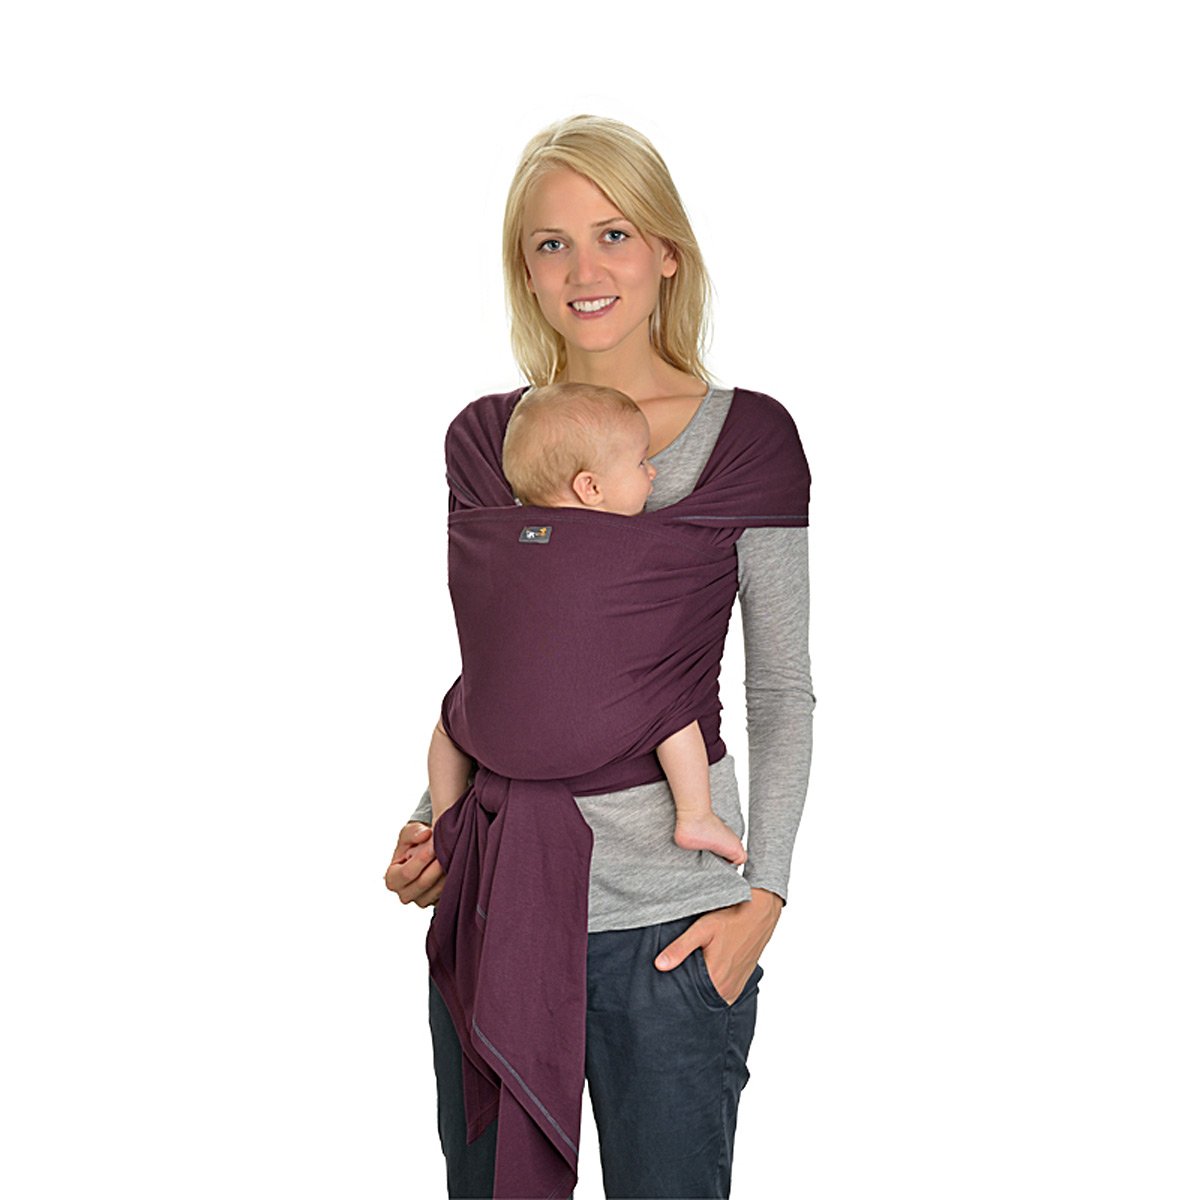 Hoppediz Elastic Baby Sling For Premature And Newborn Babies, Including Carrying Instructions aubergine